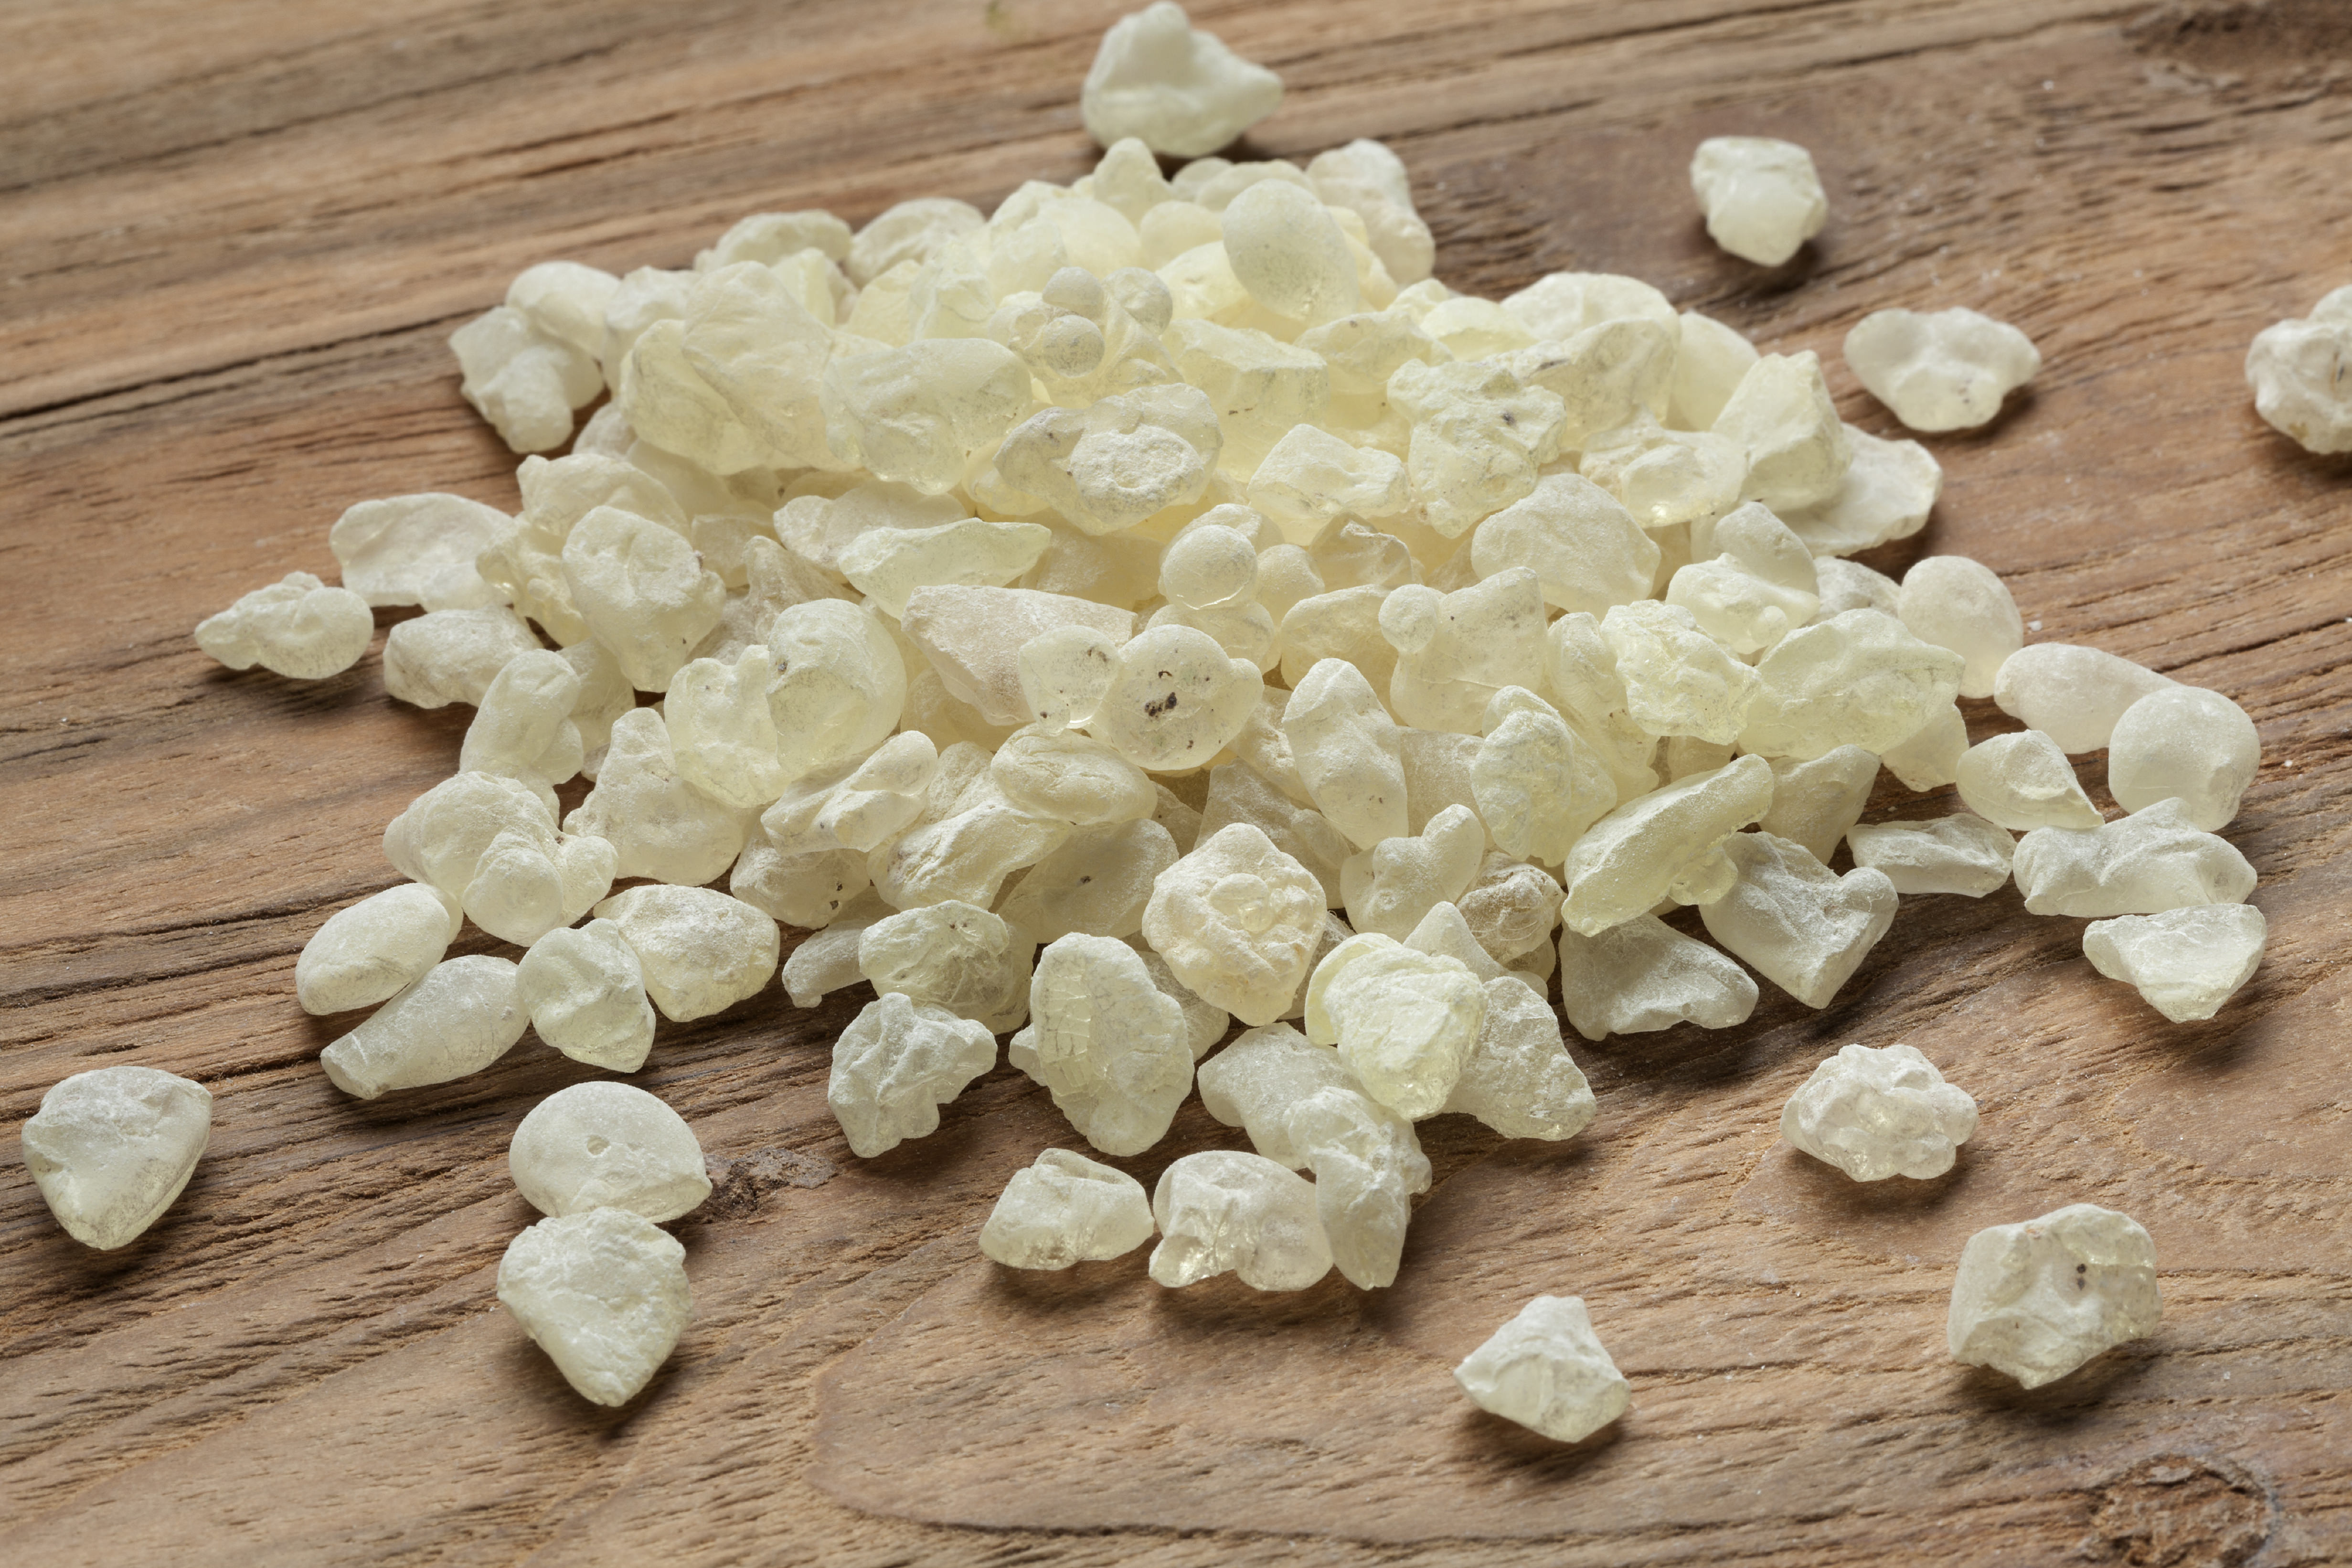 Mastic Gum: The Sought-After Ancient Mediterranean Spice 